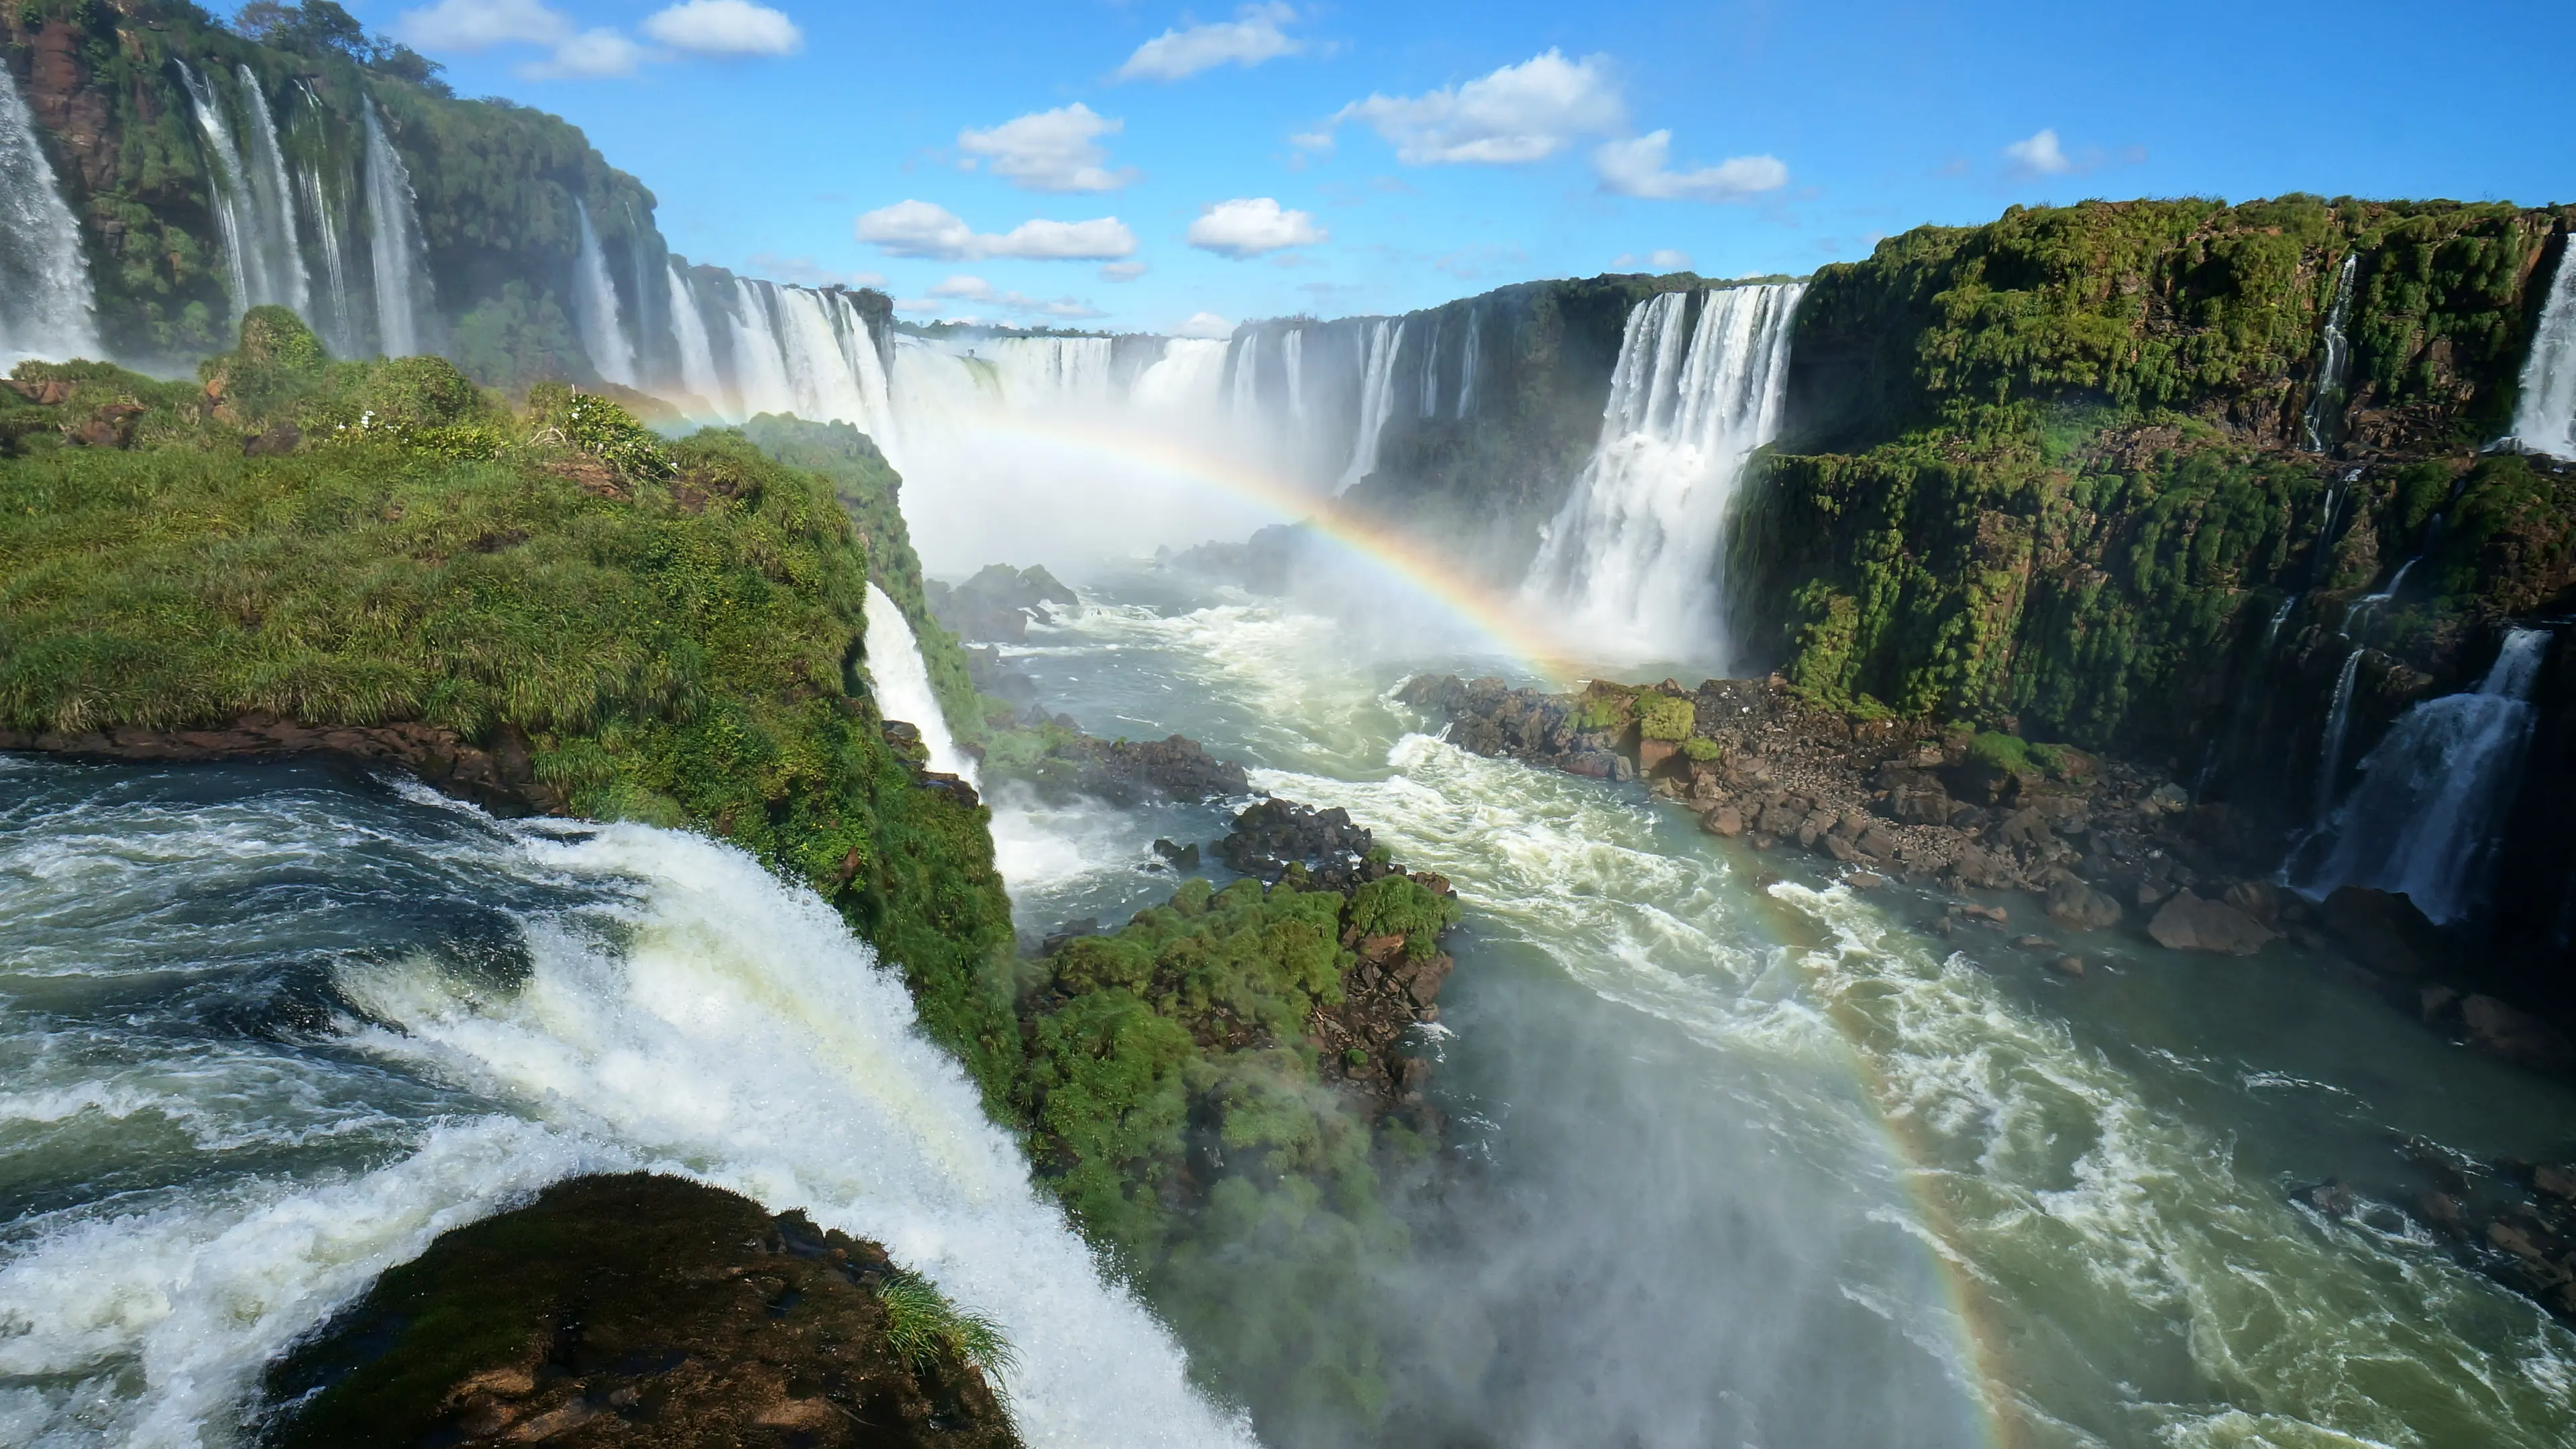 2-Day Iguazu Falls Adventure and Sightseeing with Friends